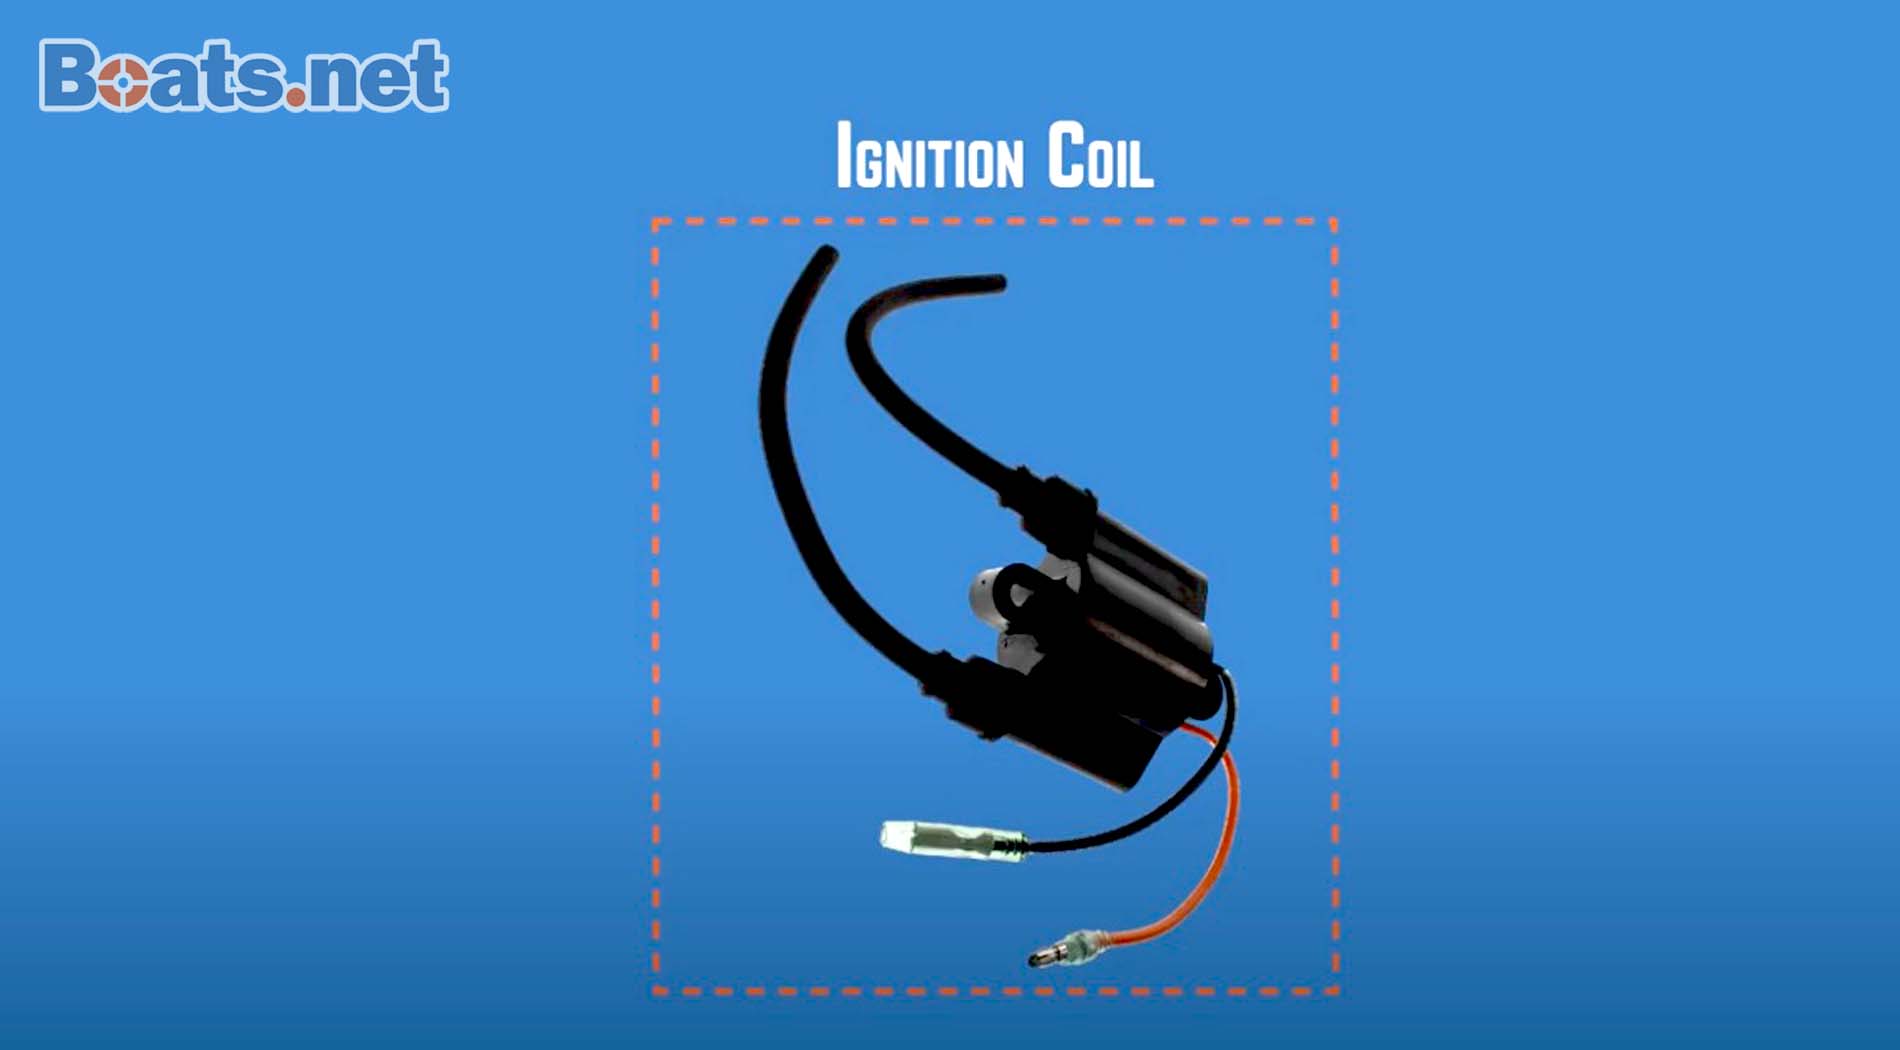 Outboard ignition system ignition coil